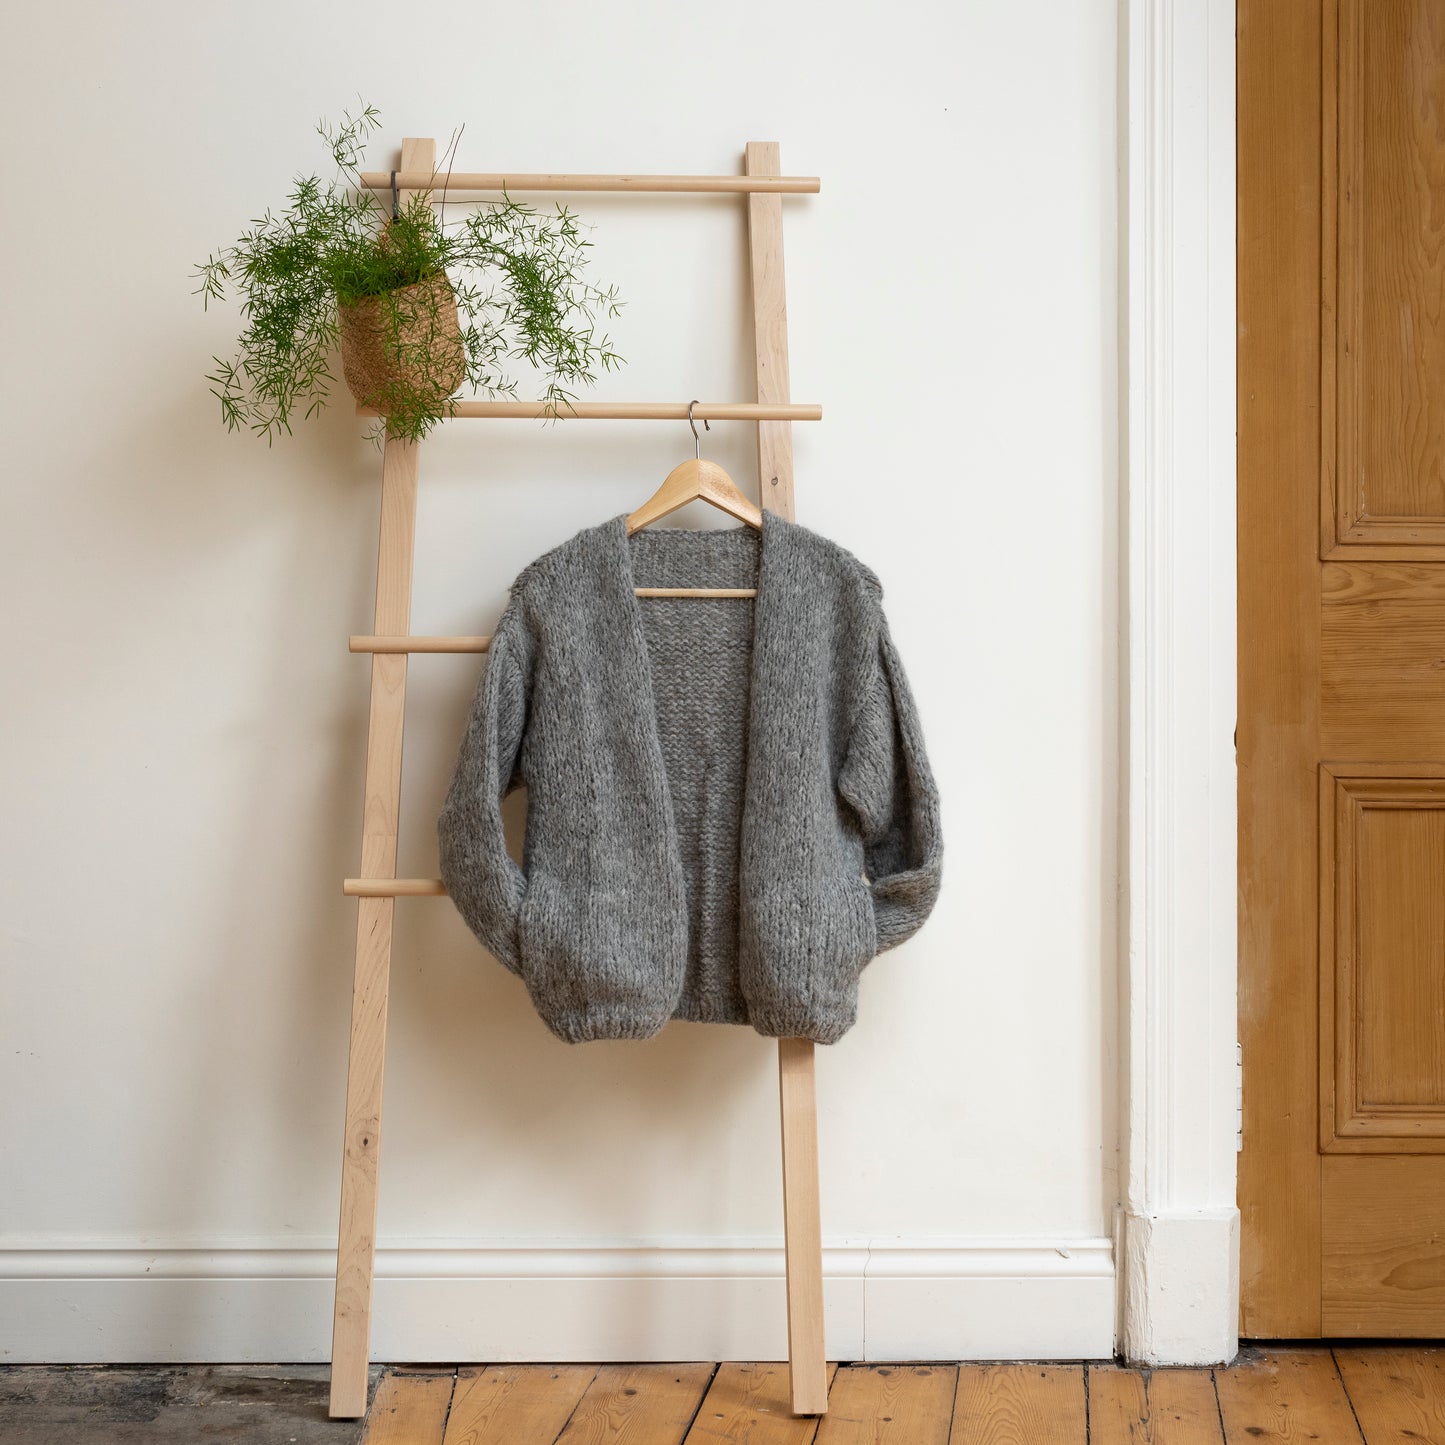 Soft grey coloured knitted alpaca wool cardigan hanging on wooden steps. Beautiful one-of-a-kind item.